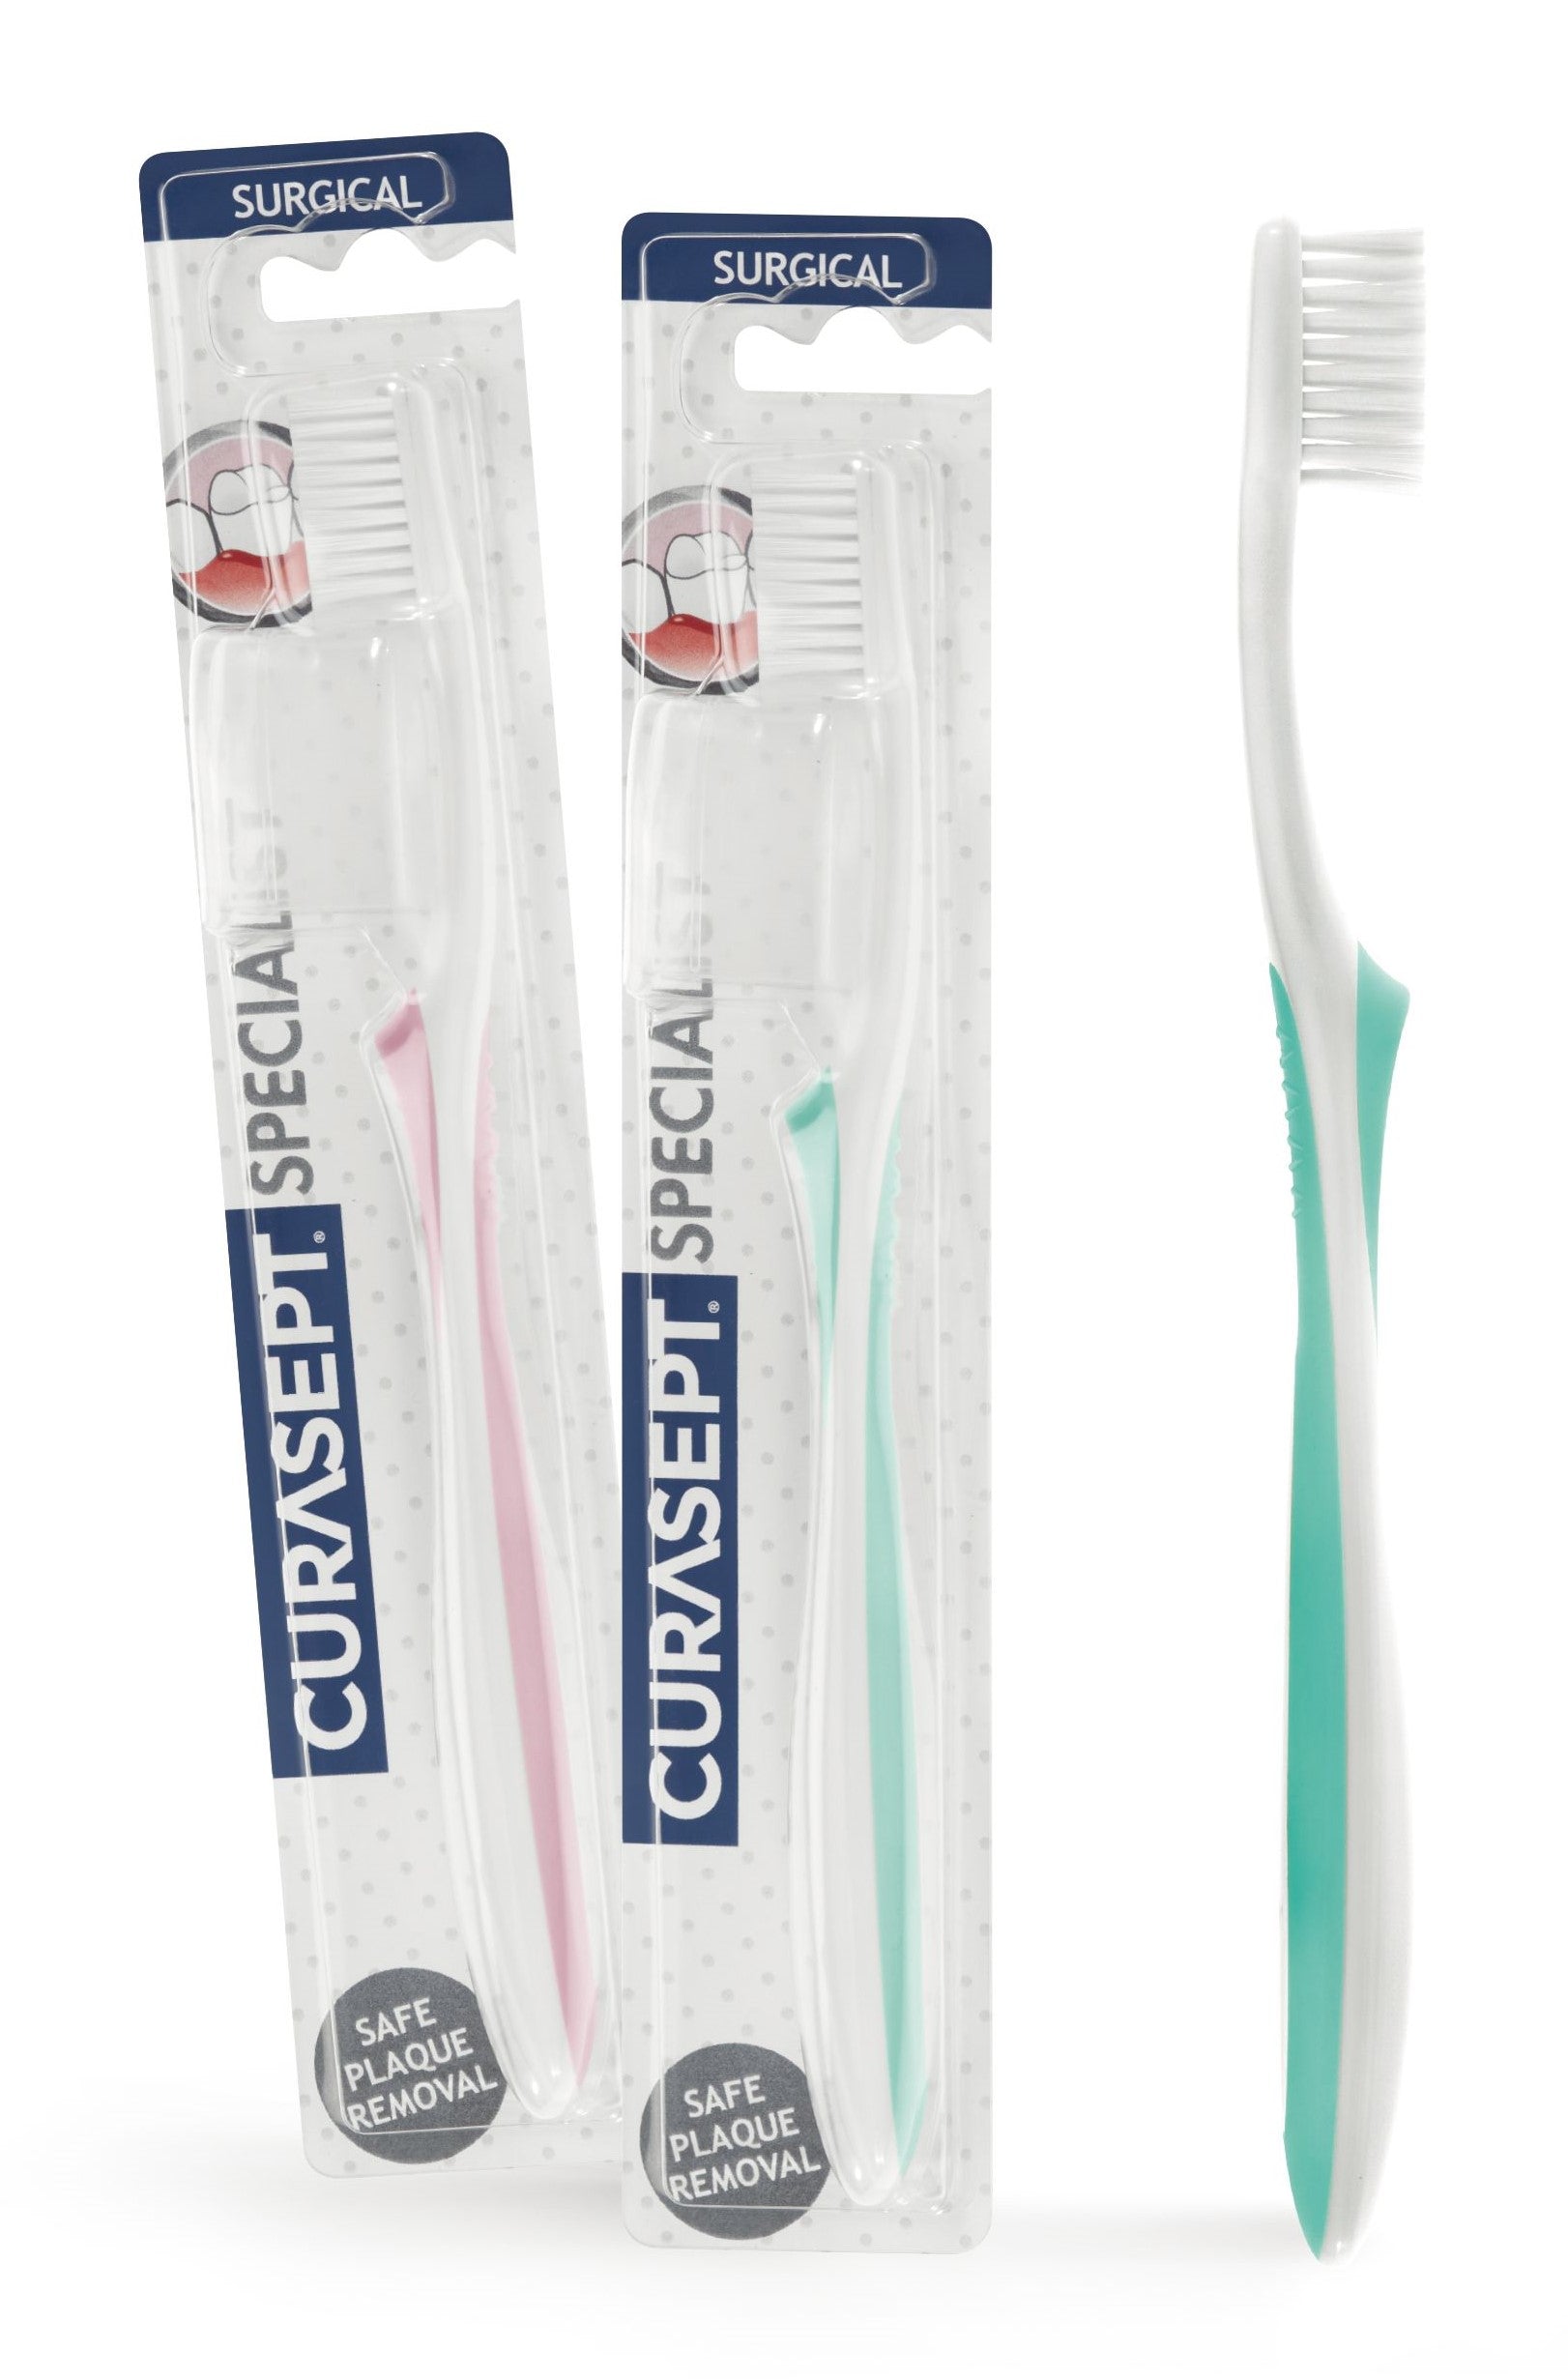 Curasept Specialist SURGICALl Toothbrush